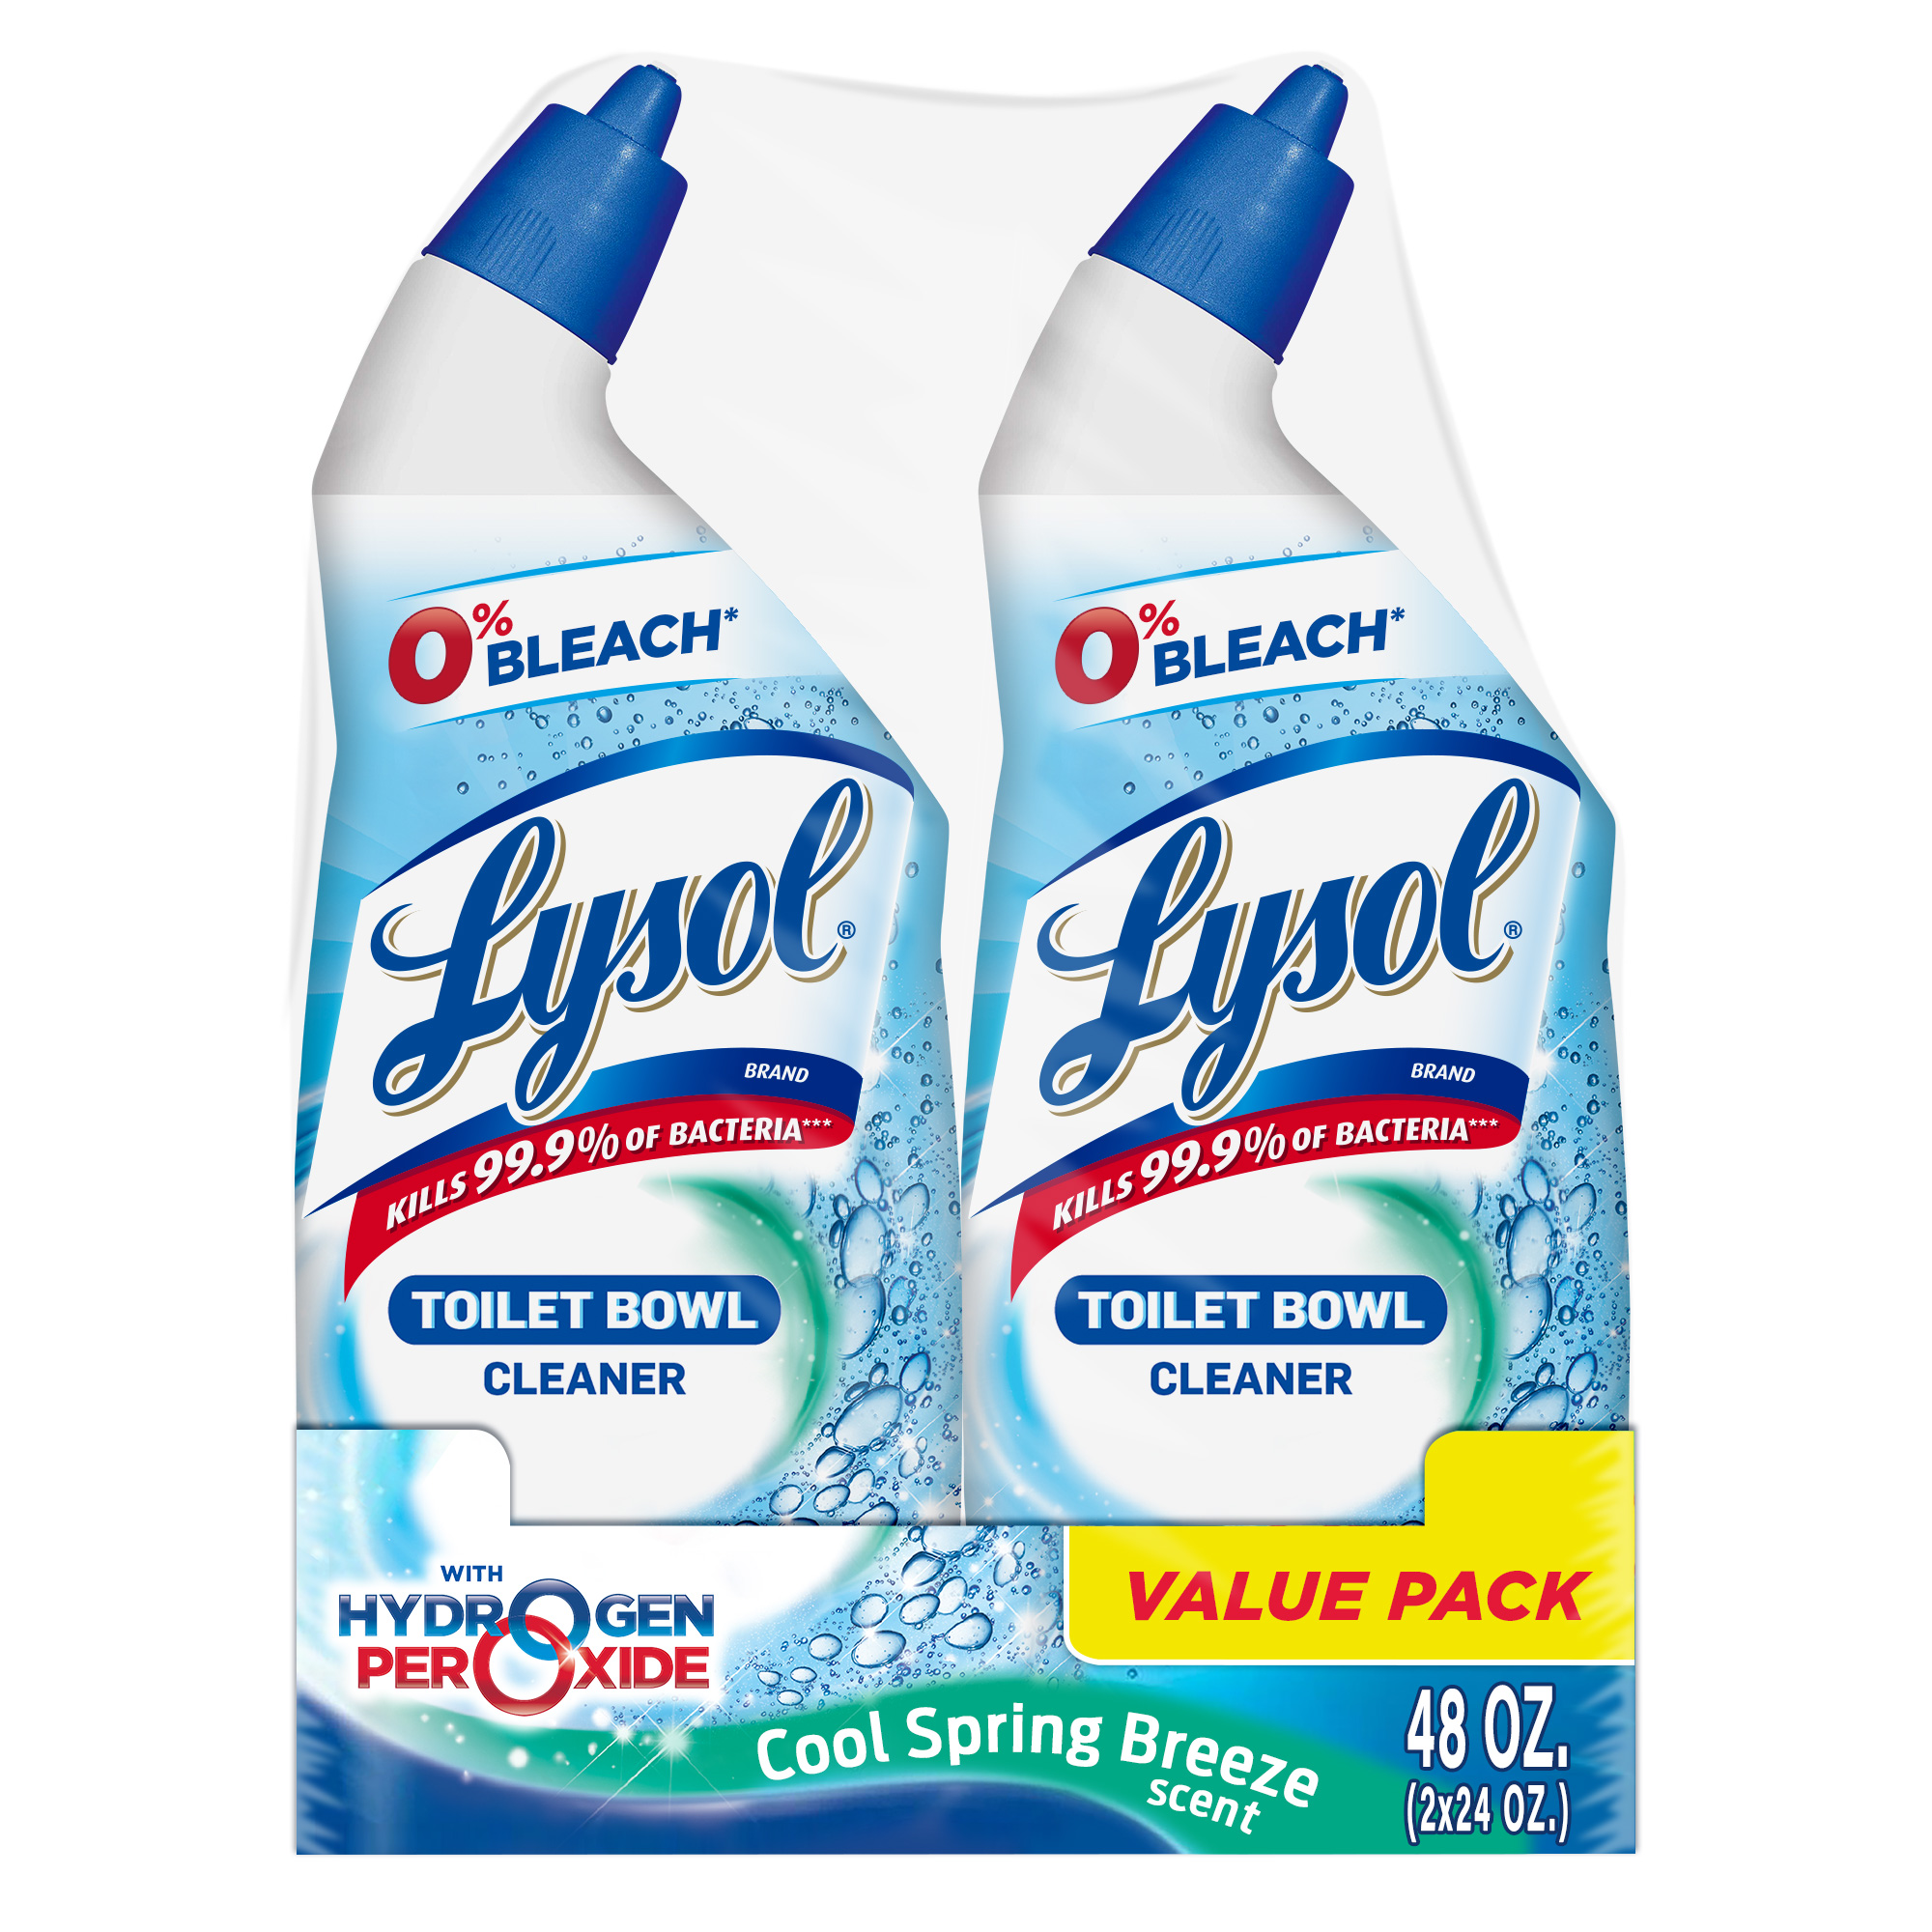 Lysol Toilet Bowl Cleaner Gel, For Cleaning and Disinfecting, Bleach Free (Contains Hydrogen Peroxide), Cool Spring Breeze Scent, 24oz (Pack of 2) - image 1 of 6